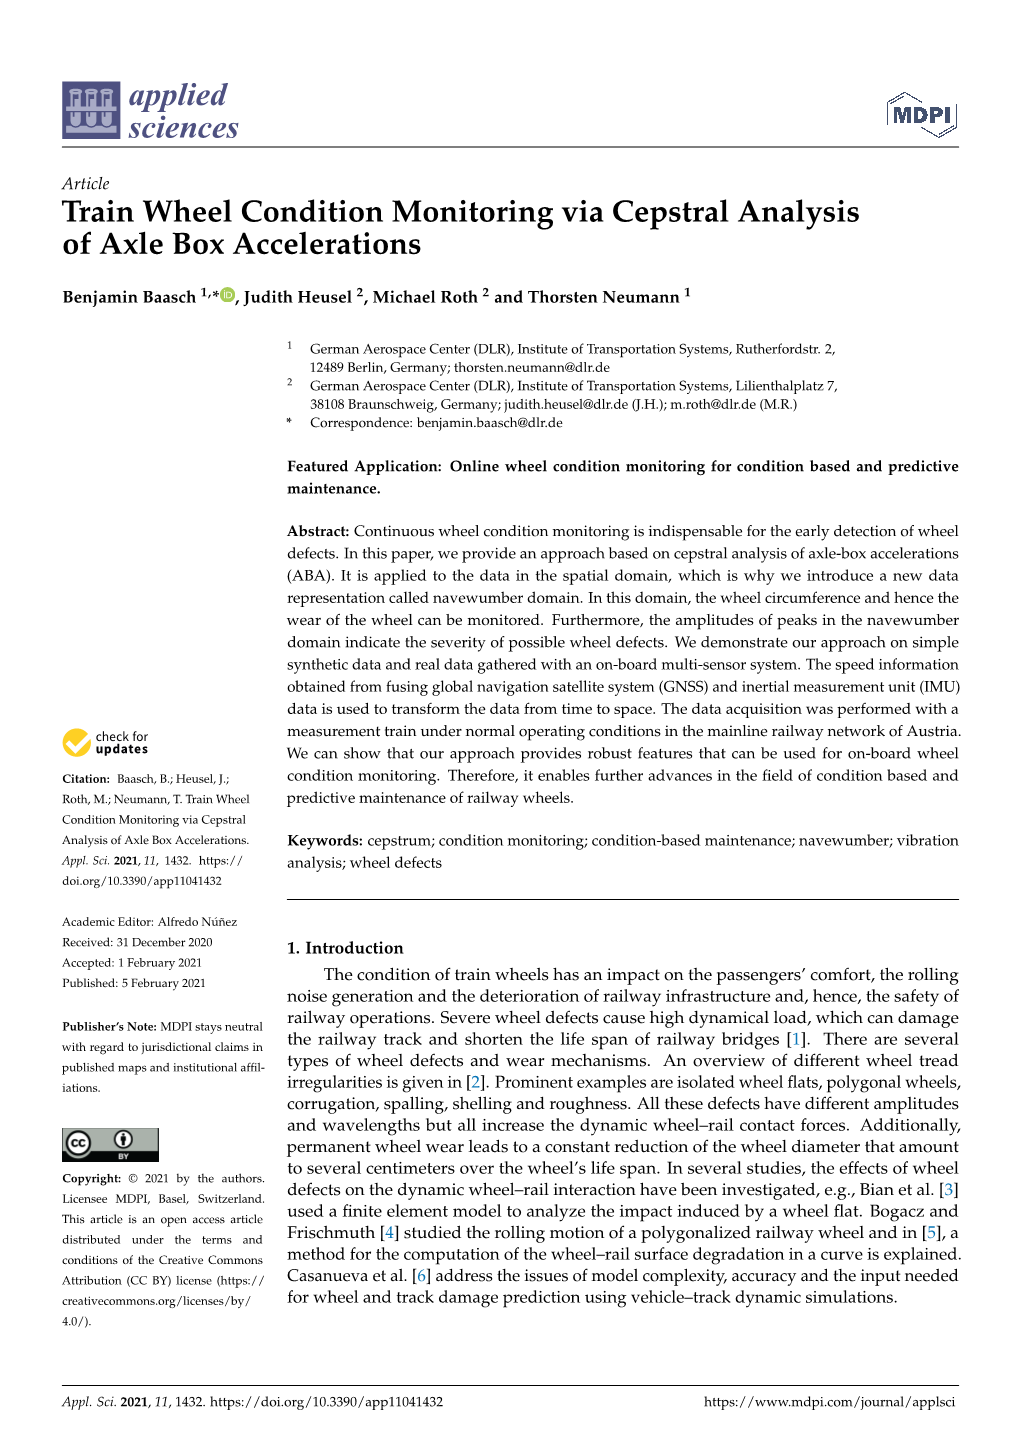 Train Wheel Condition Monitoring Via Cepstral Analysis of Axle Box Accelerations